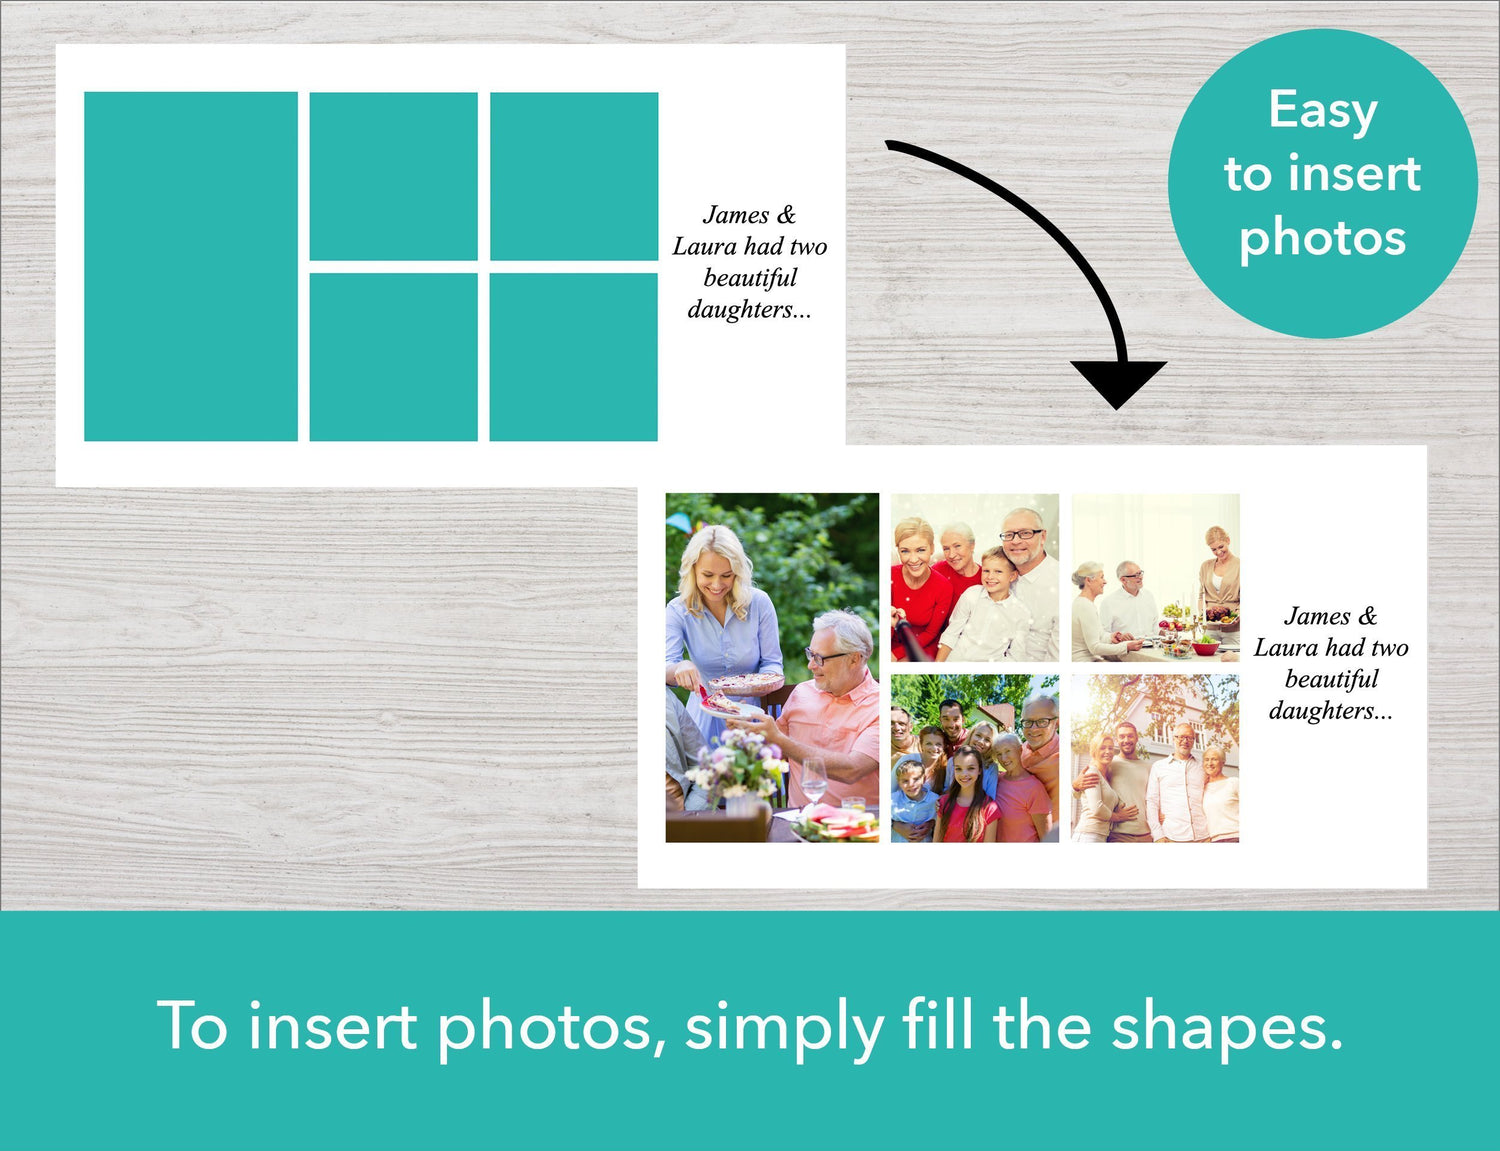 Classic Funeral Slide Show Template